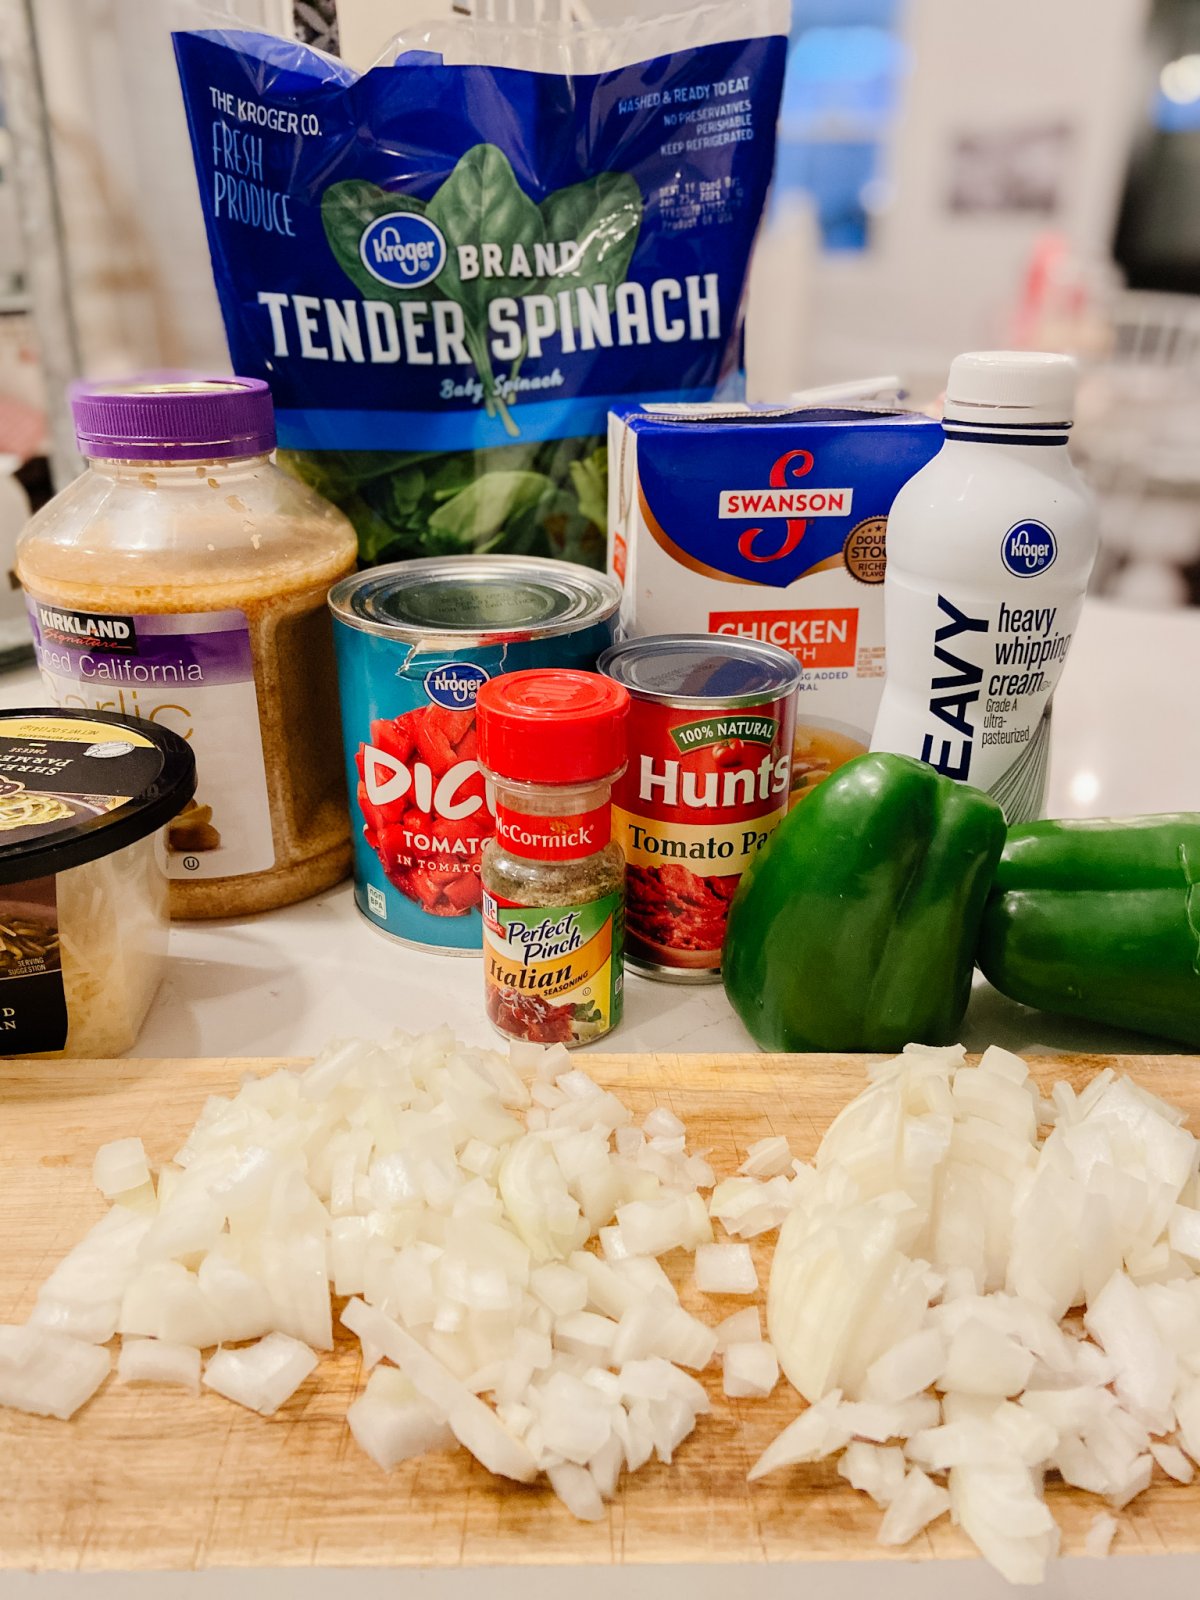 Keto Instant Pot Spicy Italian Soup ingredients. Spicy Italian sausage, herbs and veggies in a thick creamy sauce is the perfect soup to make for Winter! 